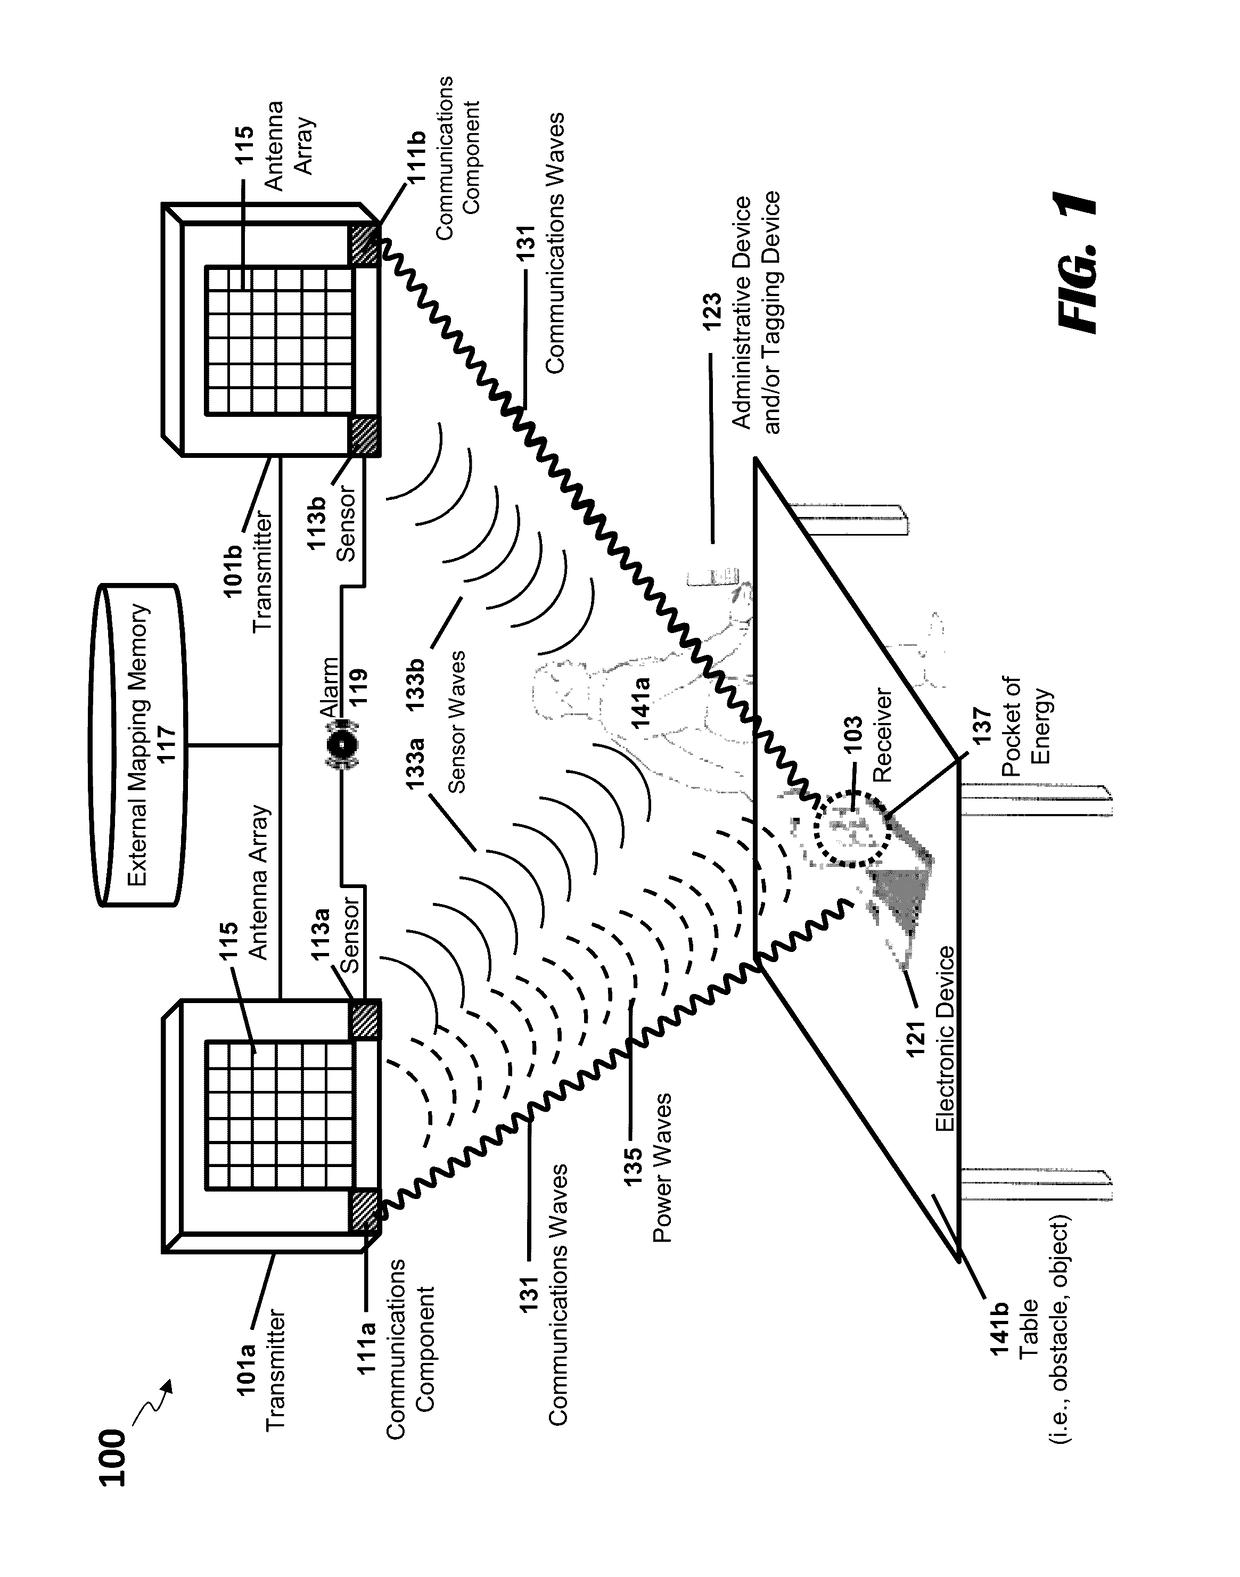 Systems and methods for transmitting power to receivers